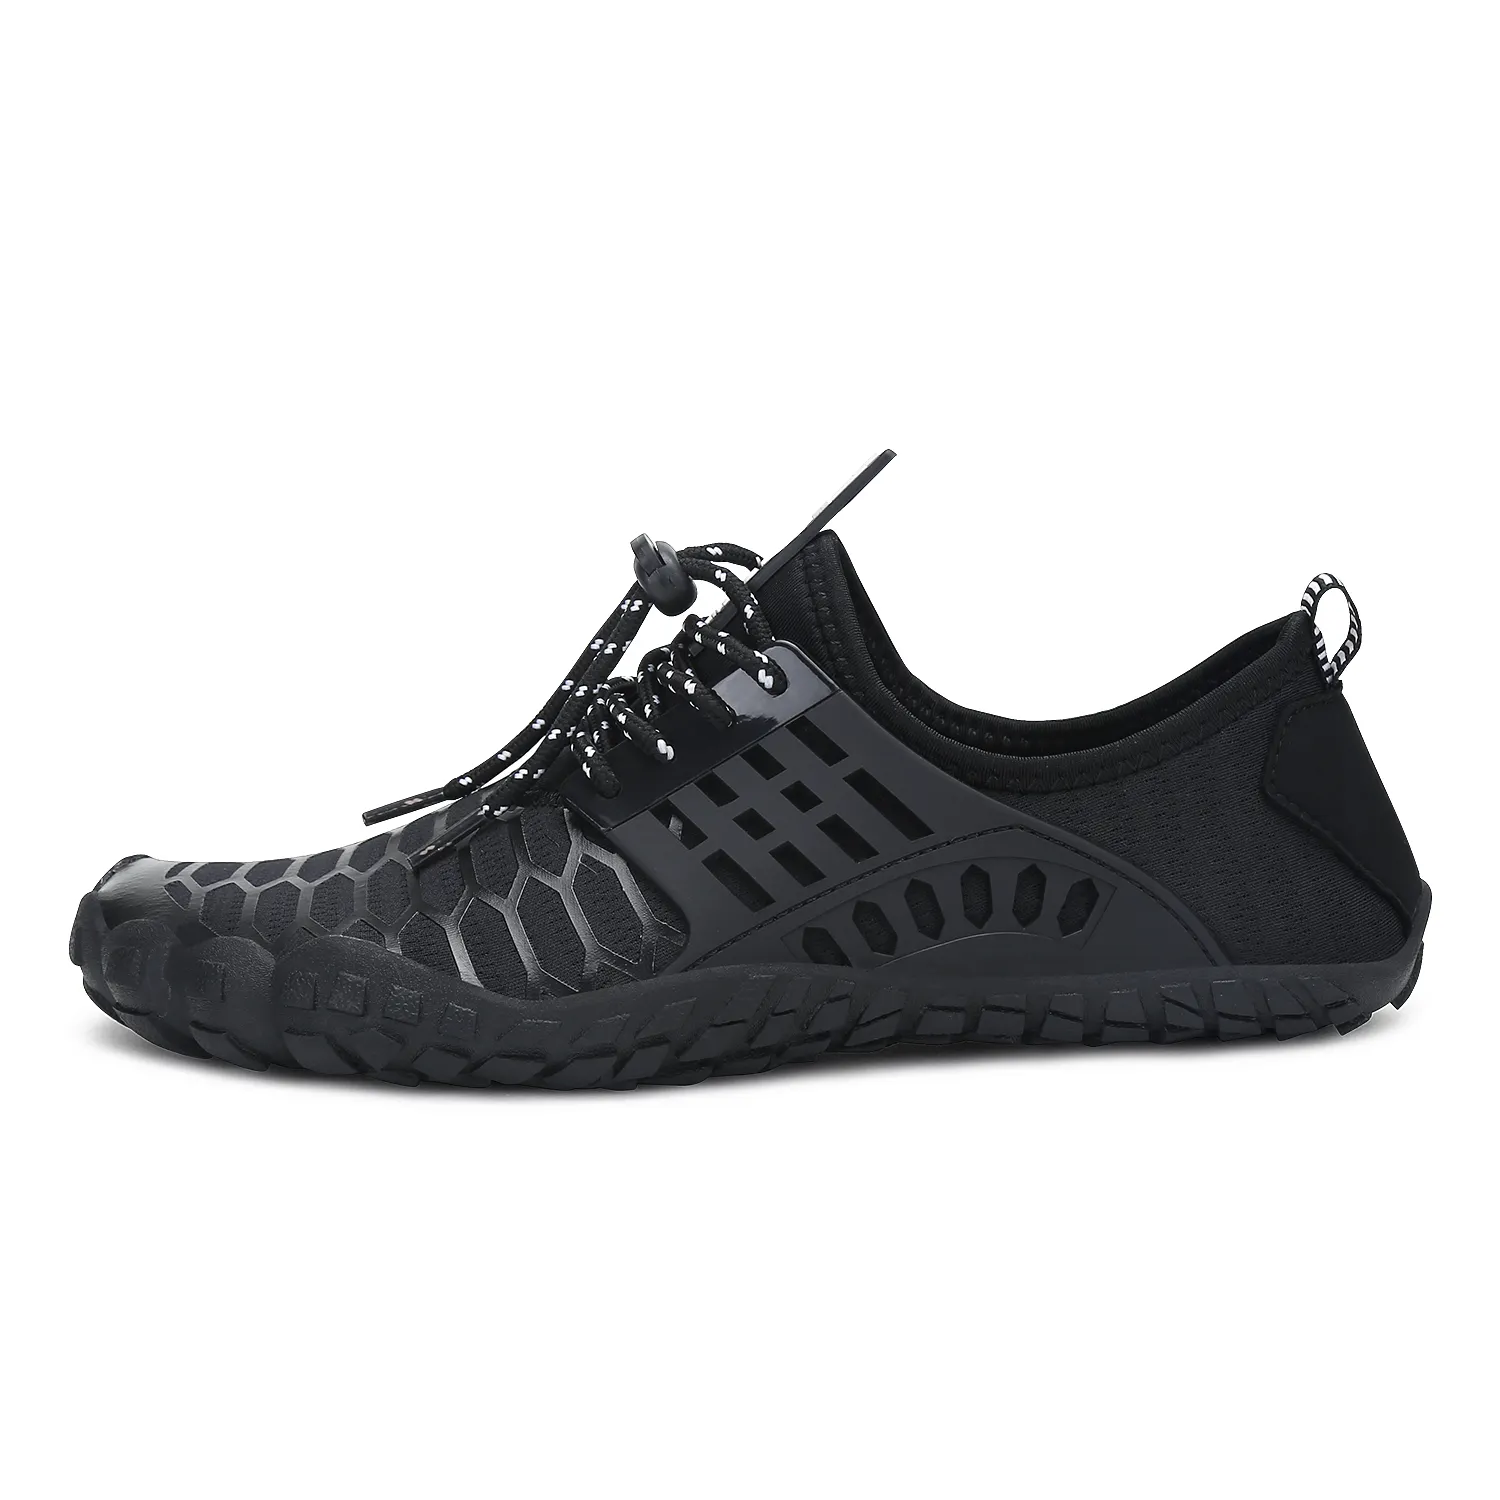 Athletic Walking Shoes Men Soft Water Shoes